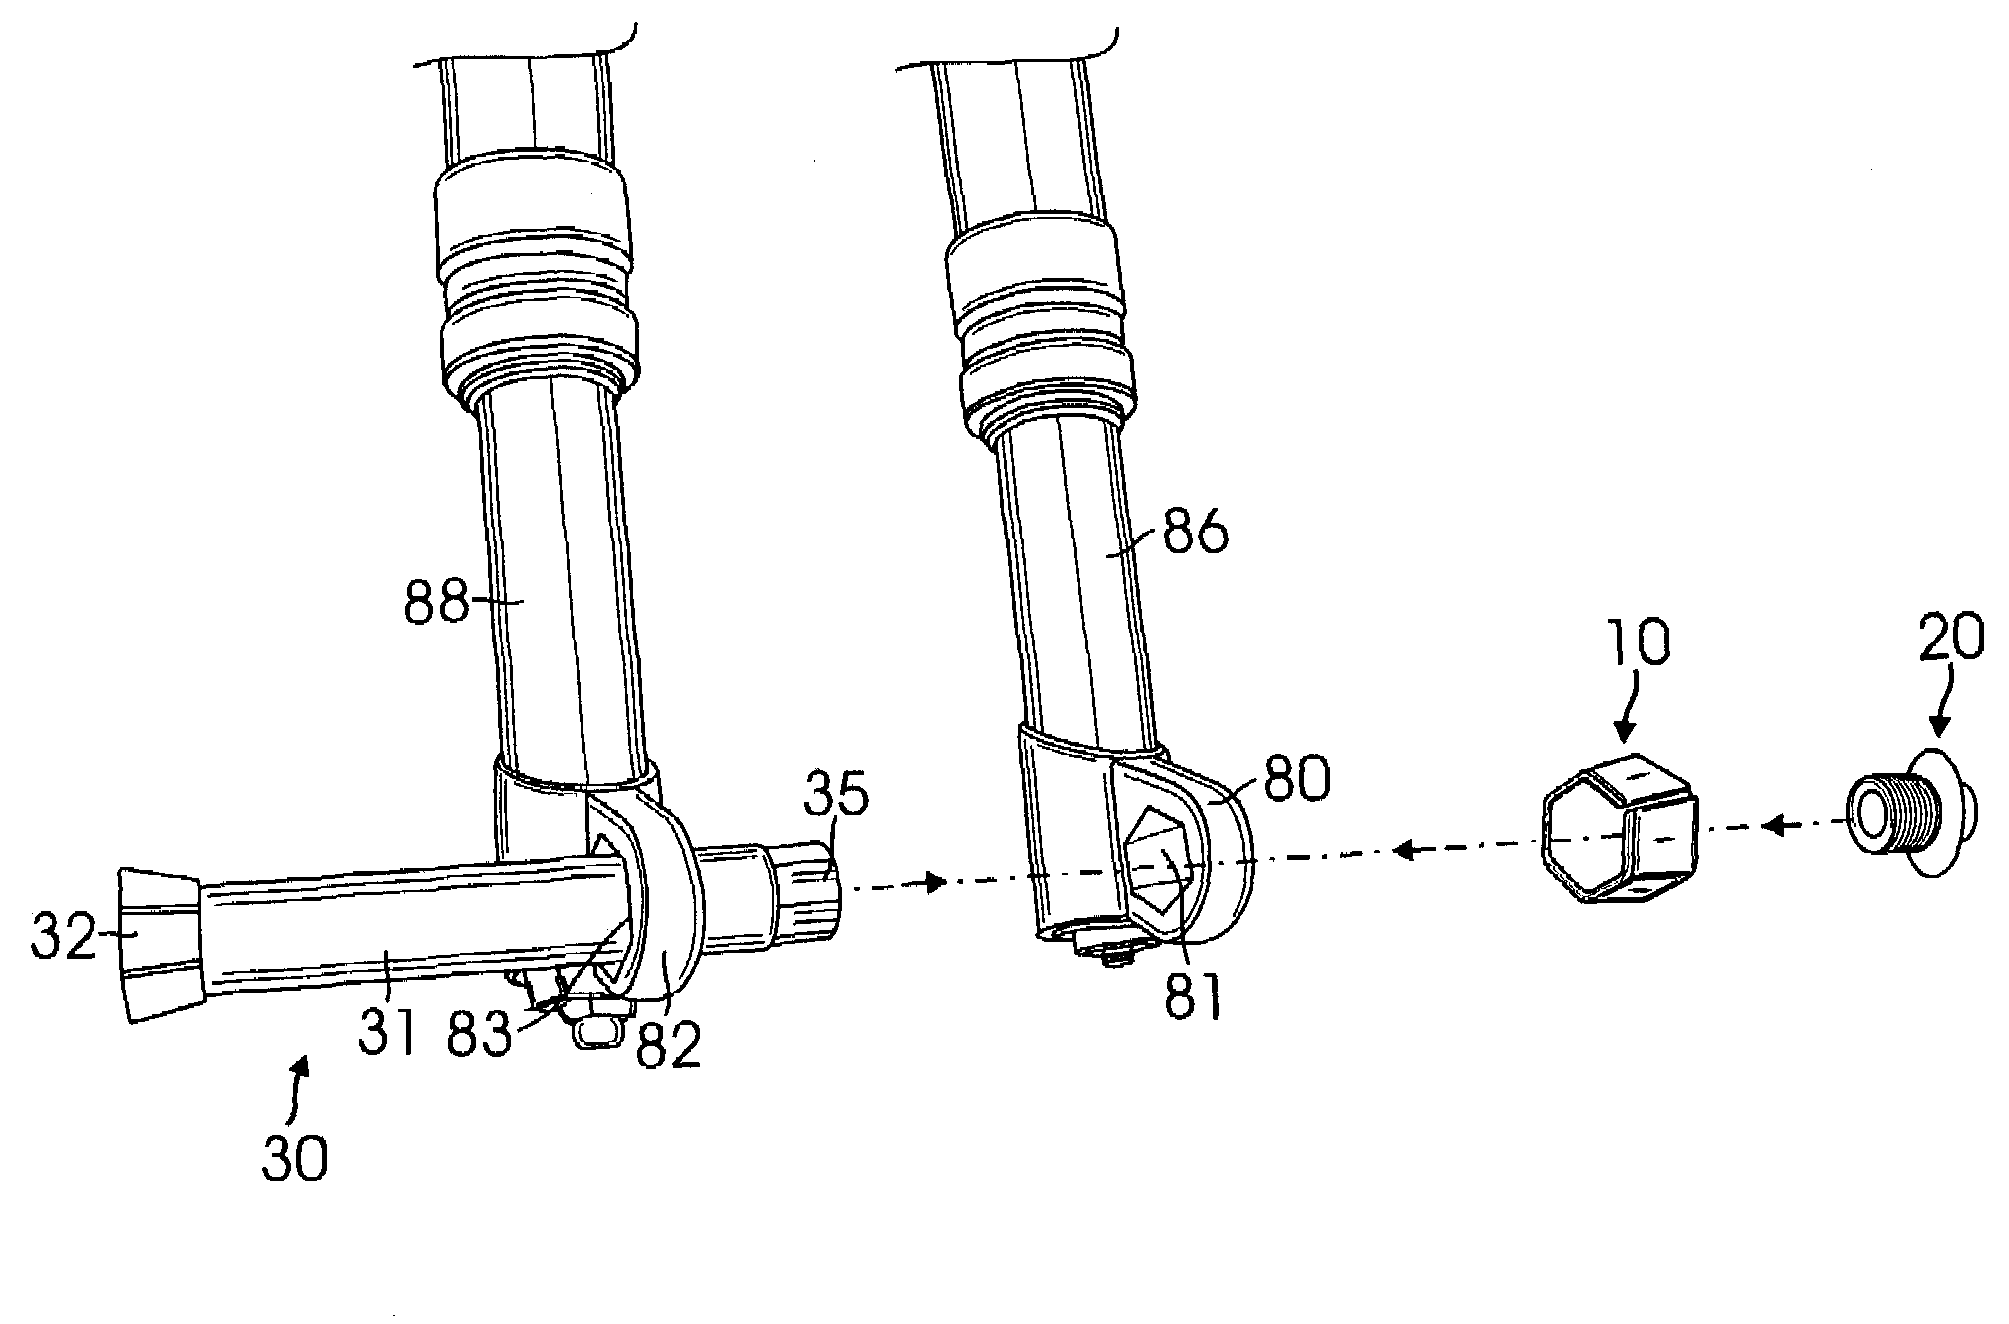 Axle with non-round tapered ends affixed into fork leg dropouts with openings that match the axle ends for a bicycle fork